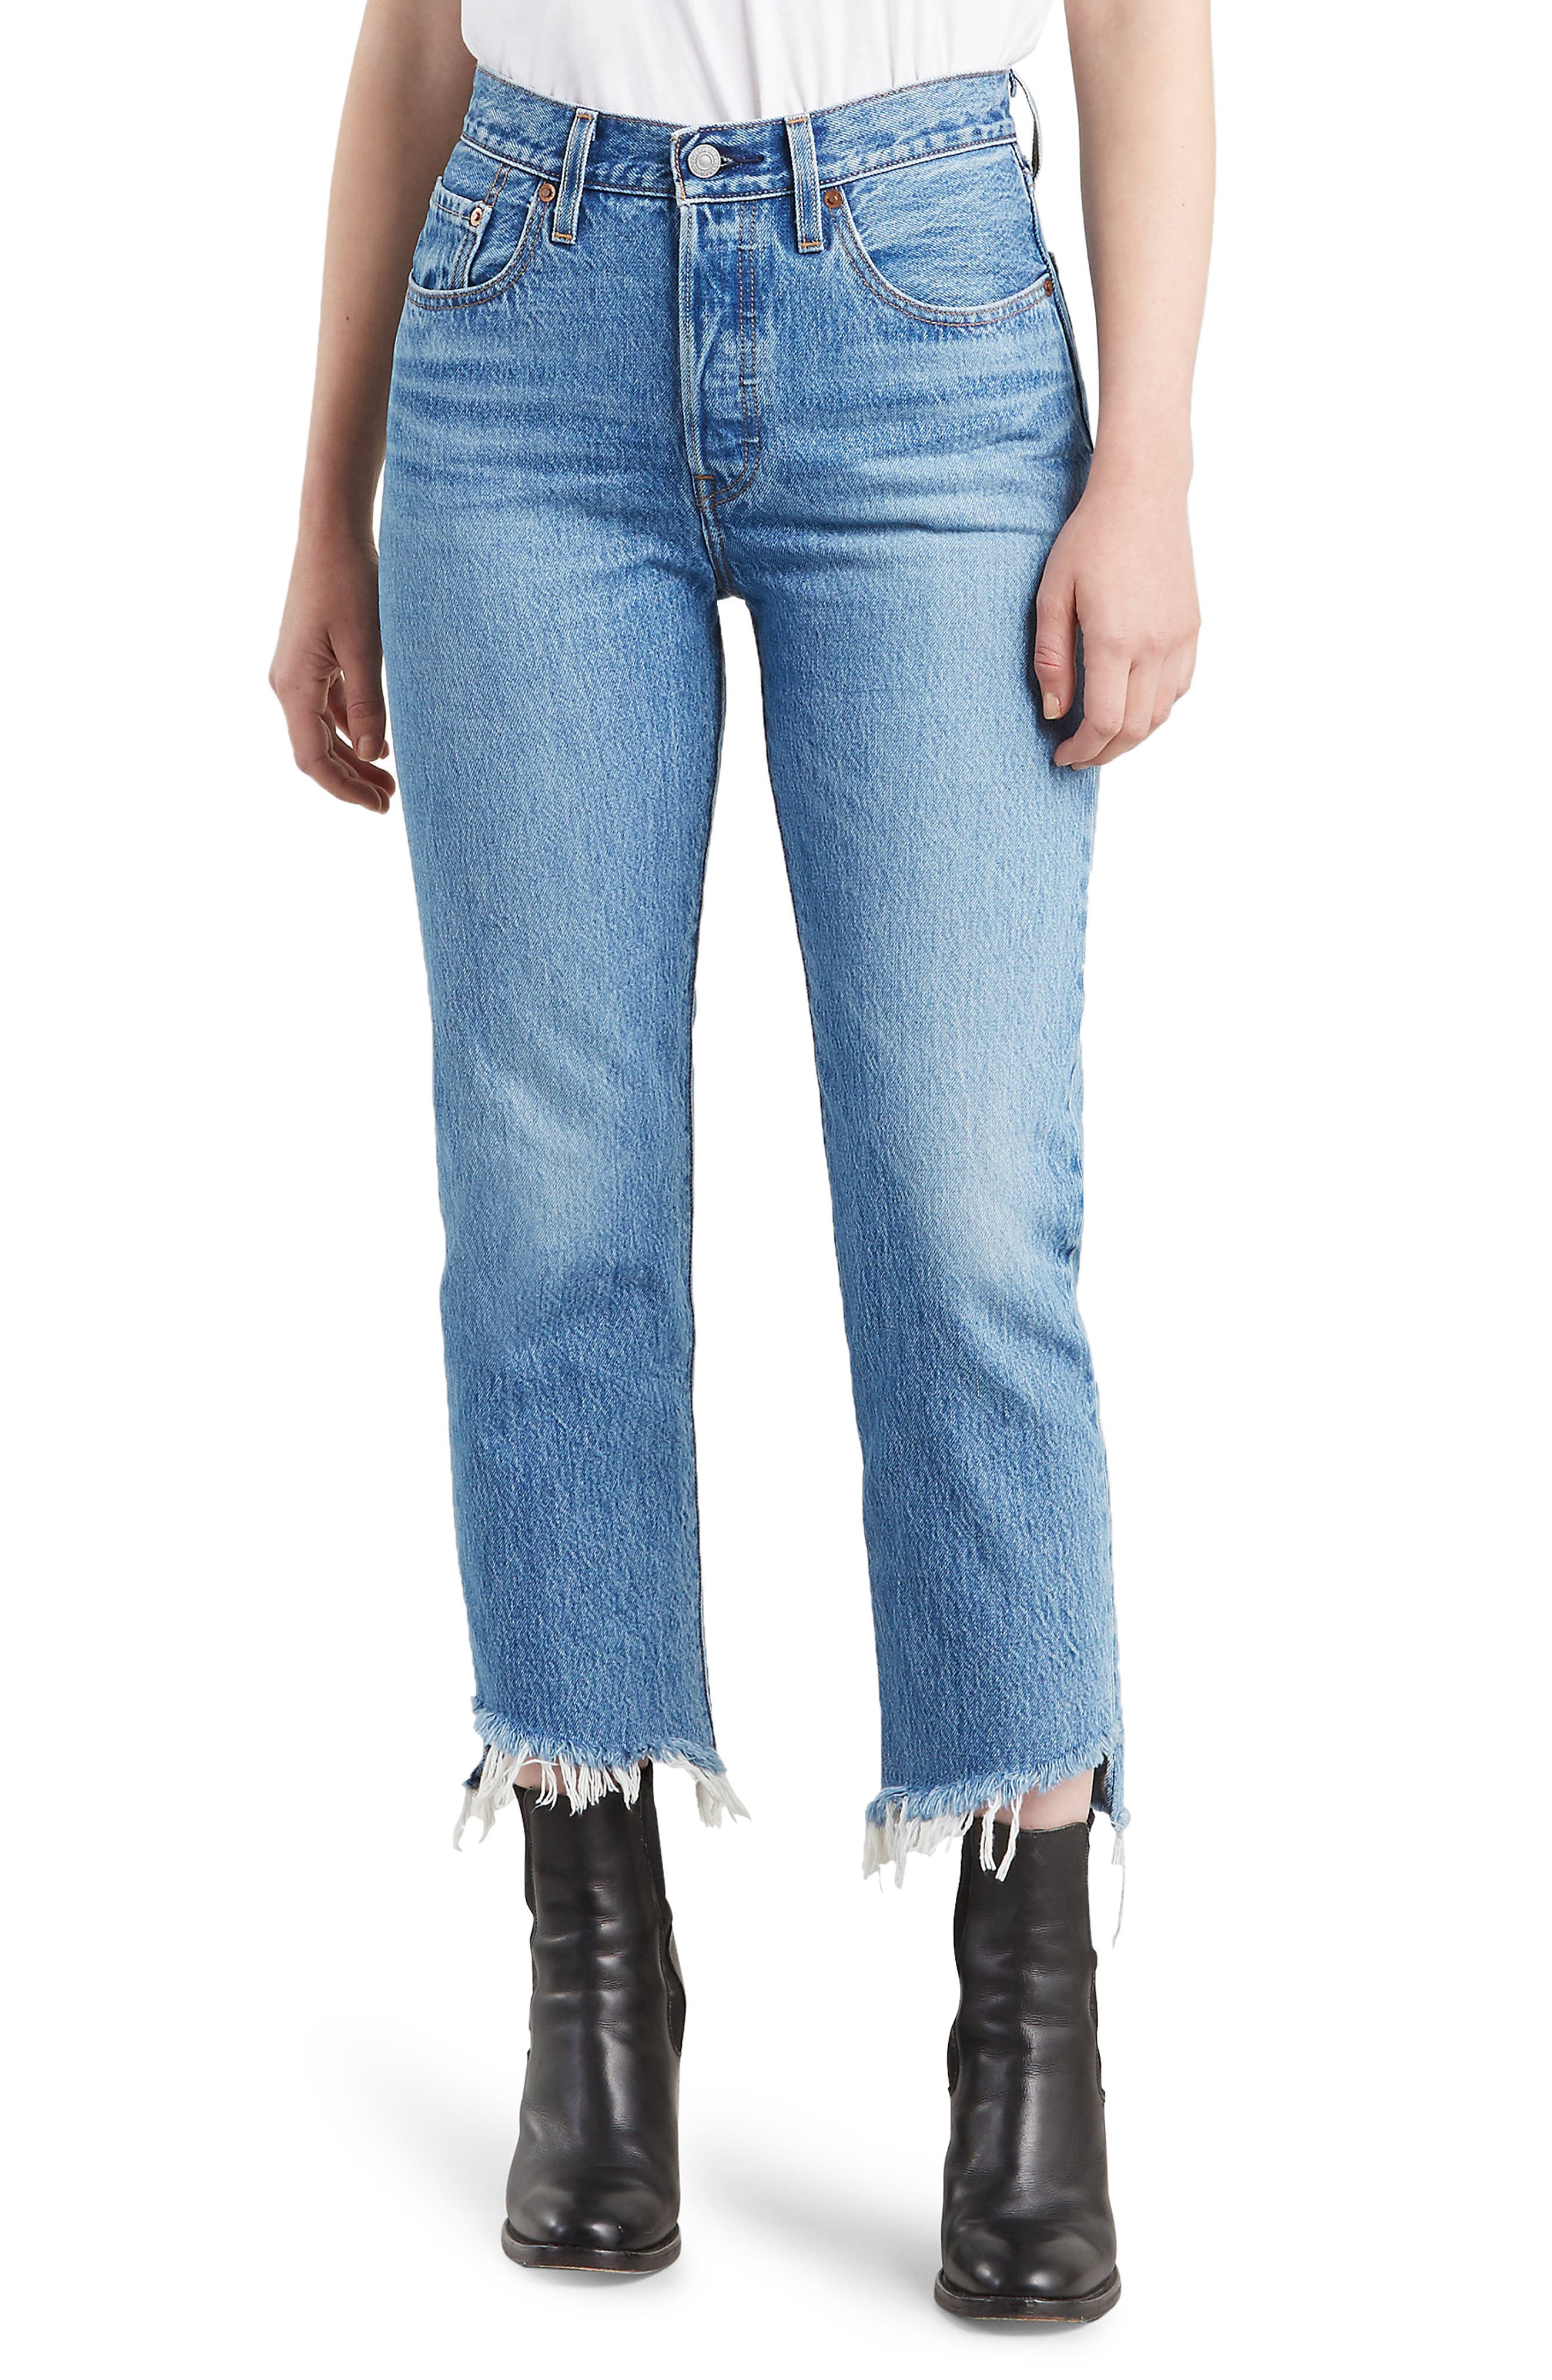 jeans similar to levis 501